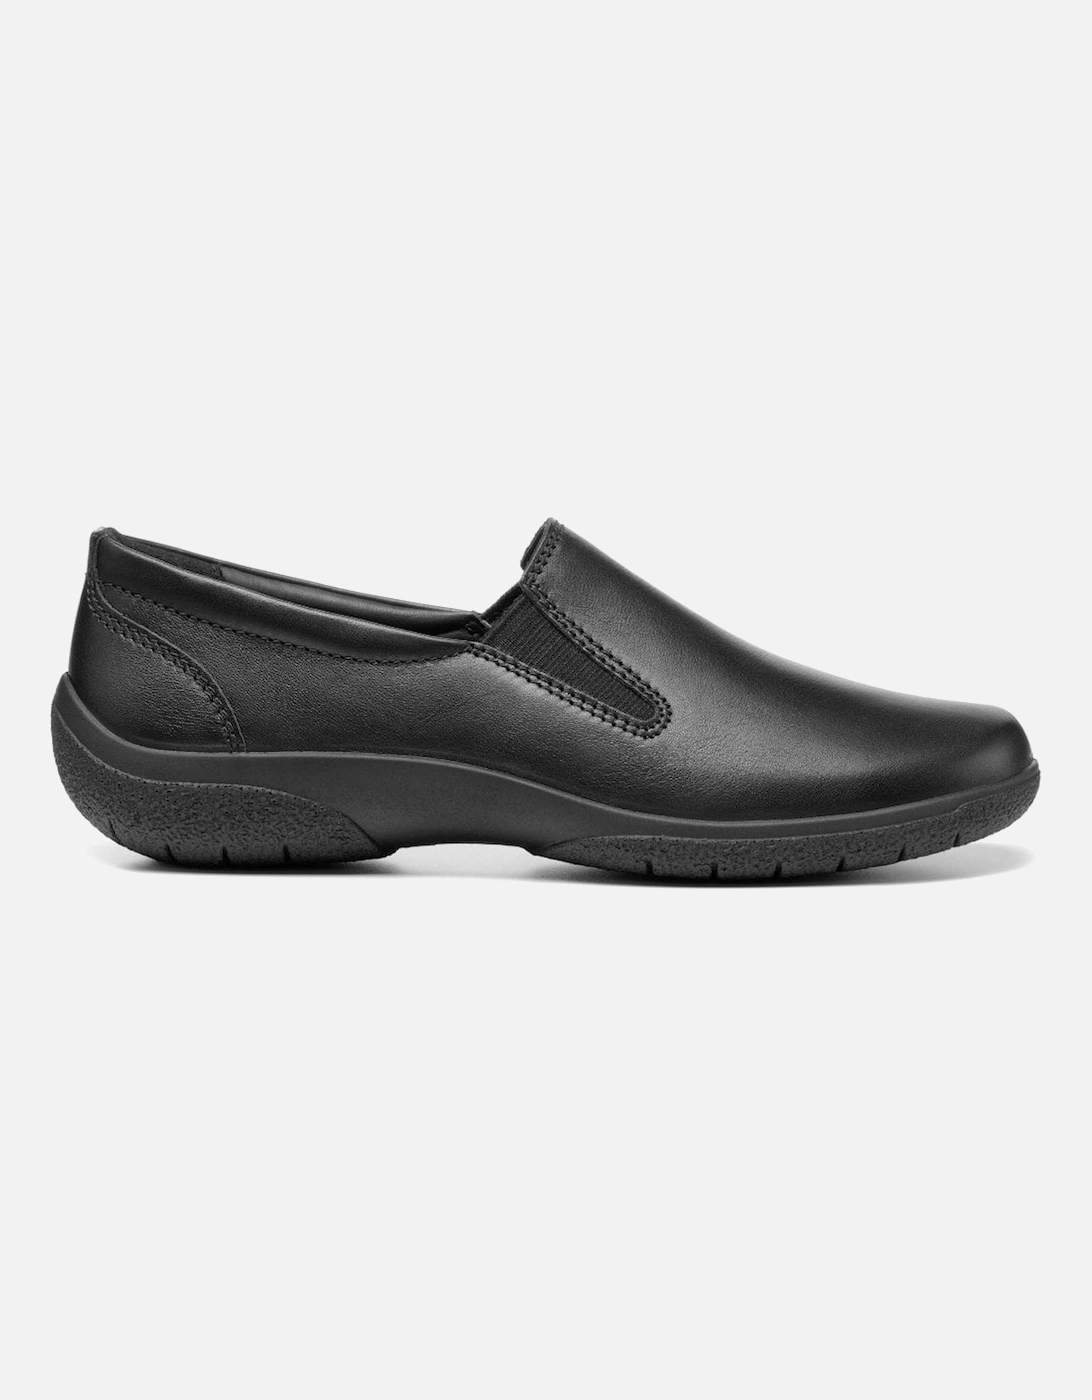 Glove II Womens Wide Fit Slip On Shoes